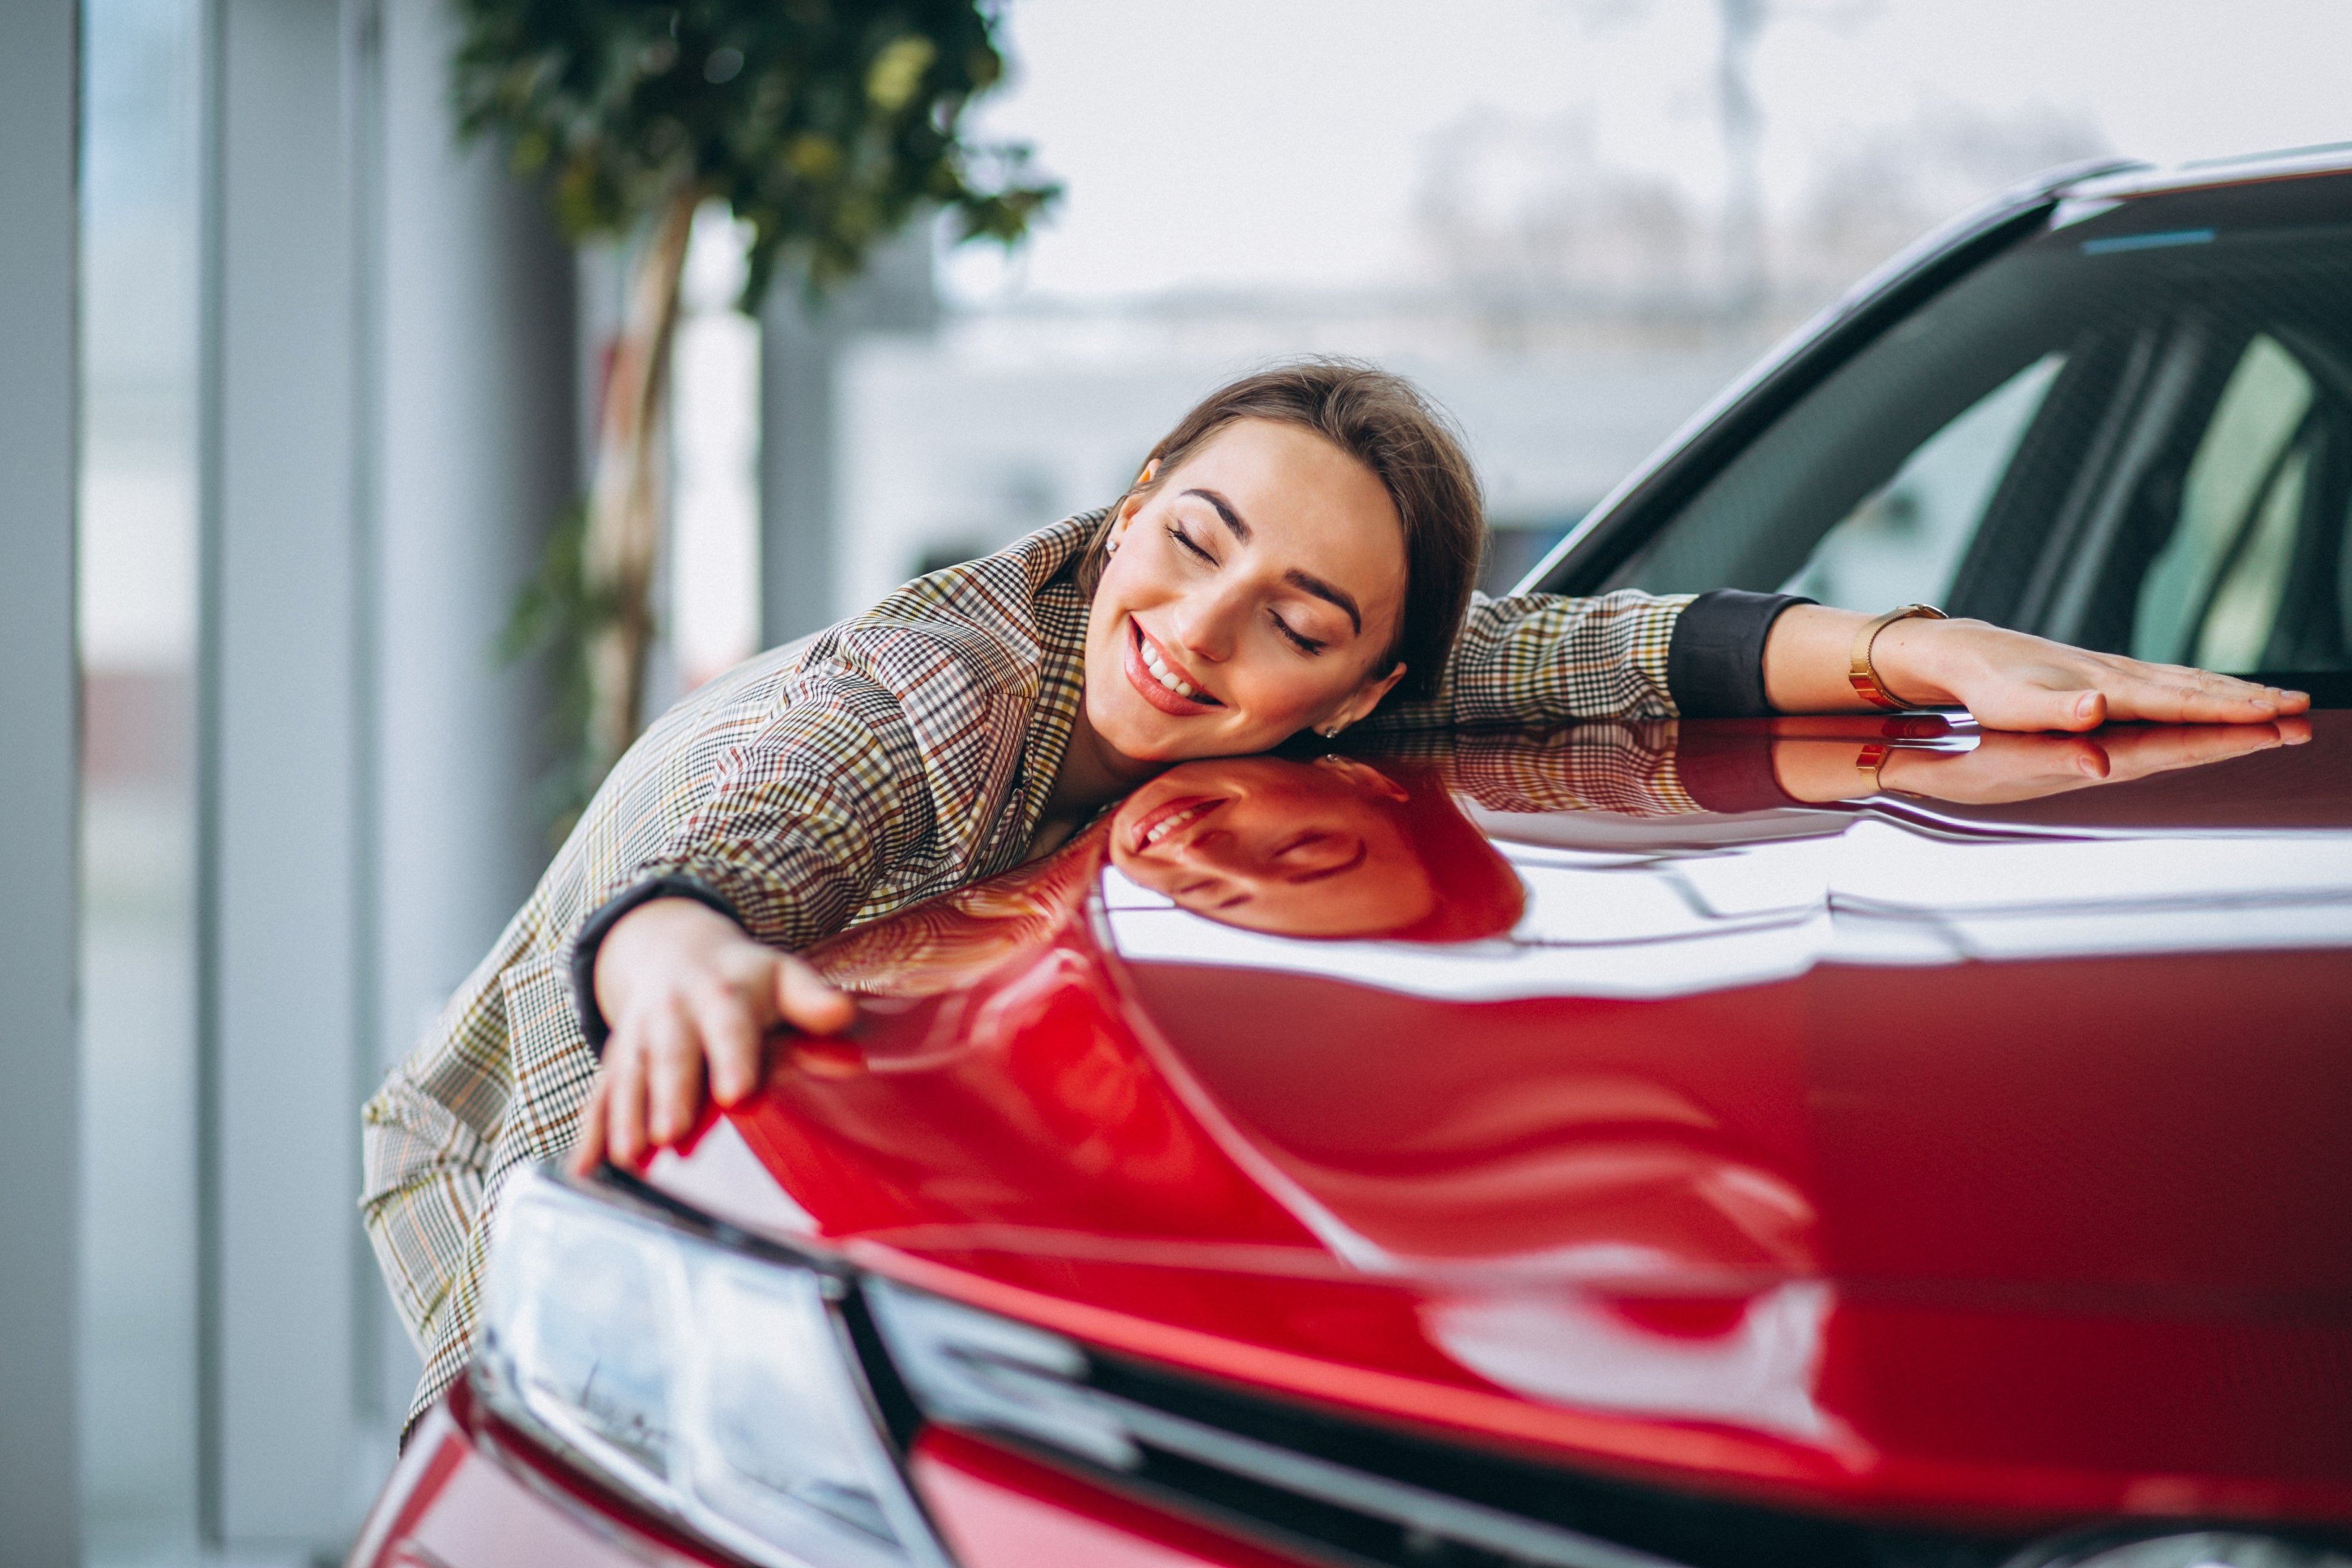 A woman hugs the fender of her new, red sports car at the dealership